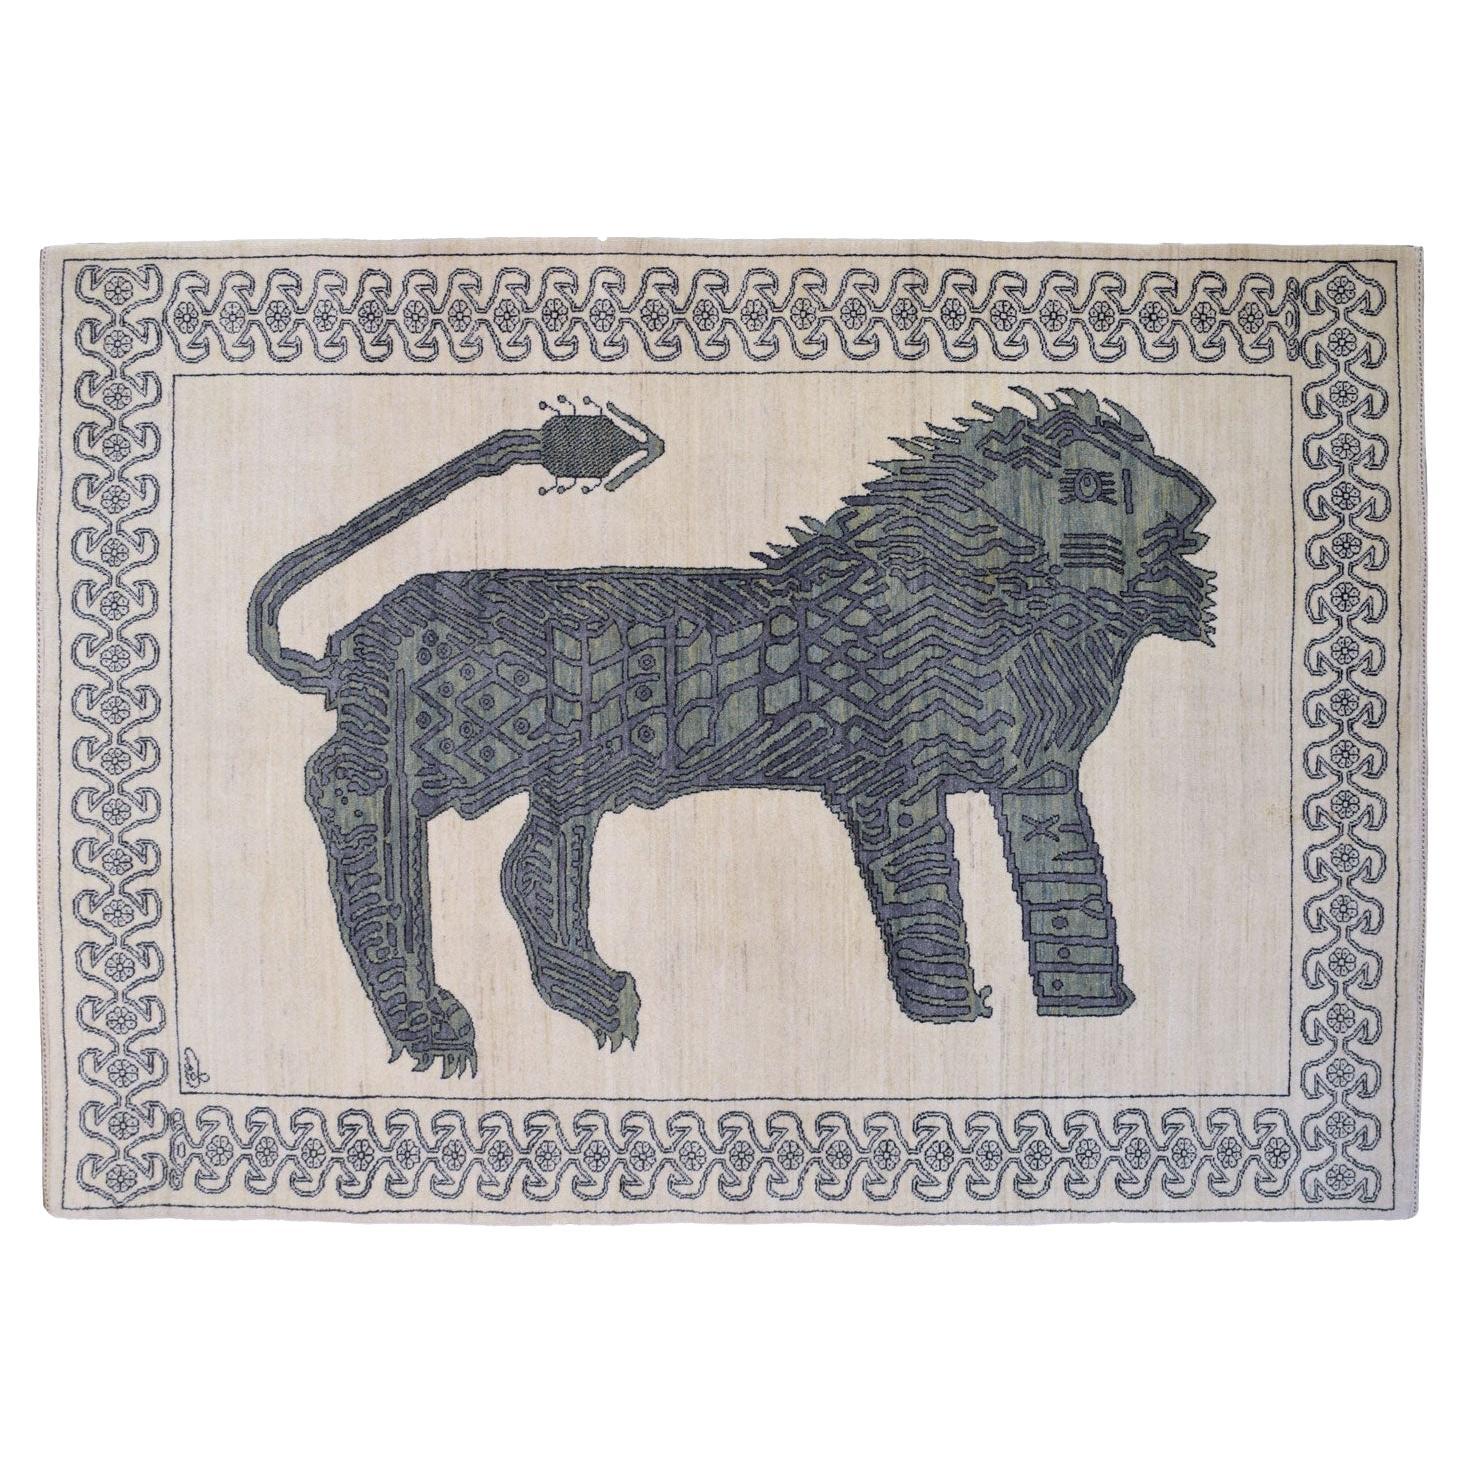 Orley Shabahang "Majesty" Lion Persian Carpet, 5' x 7' For Sale